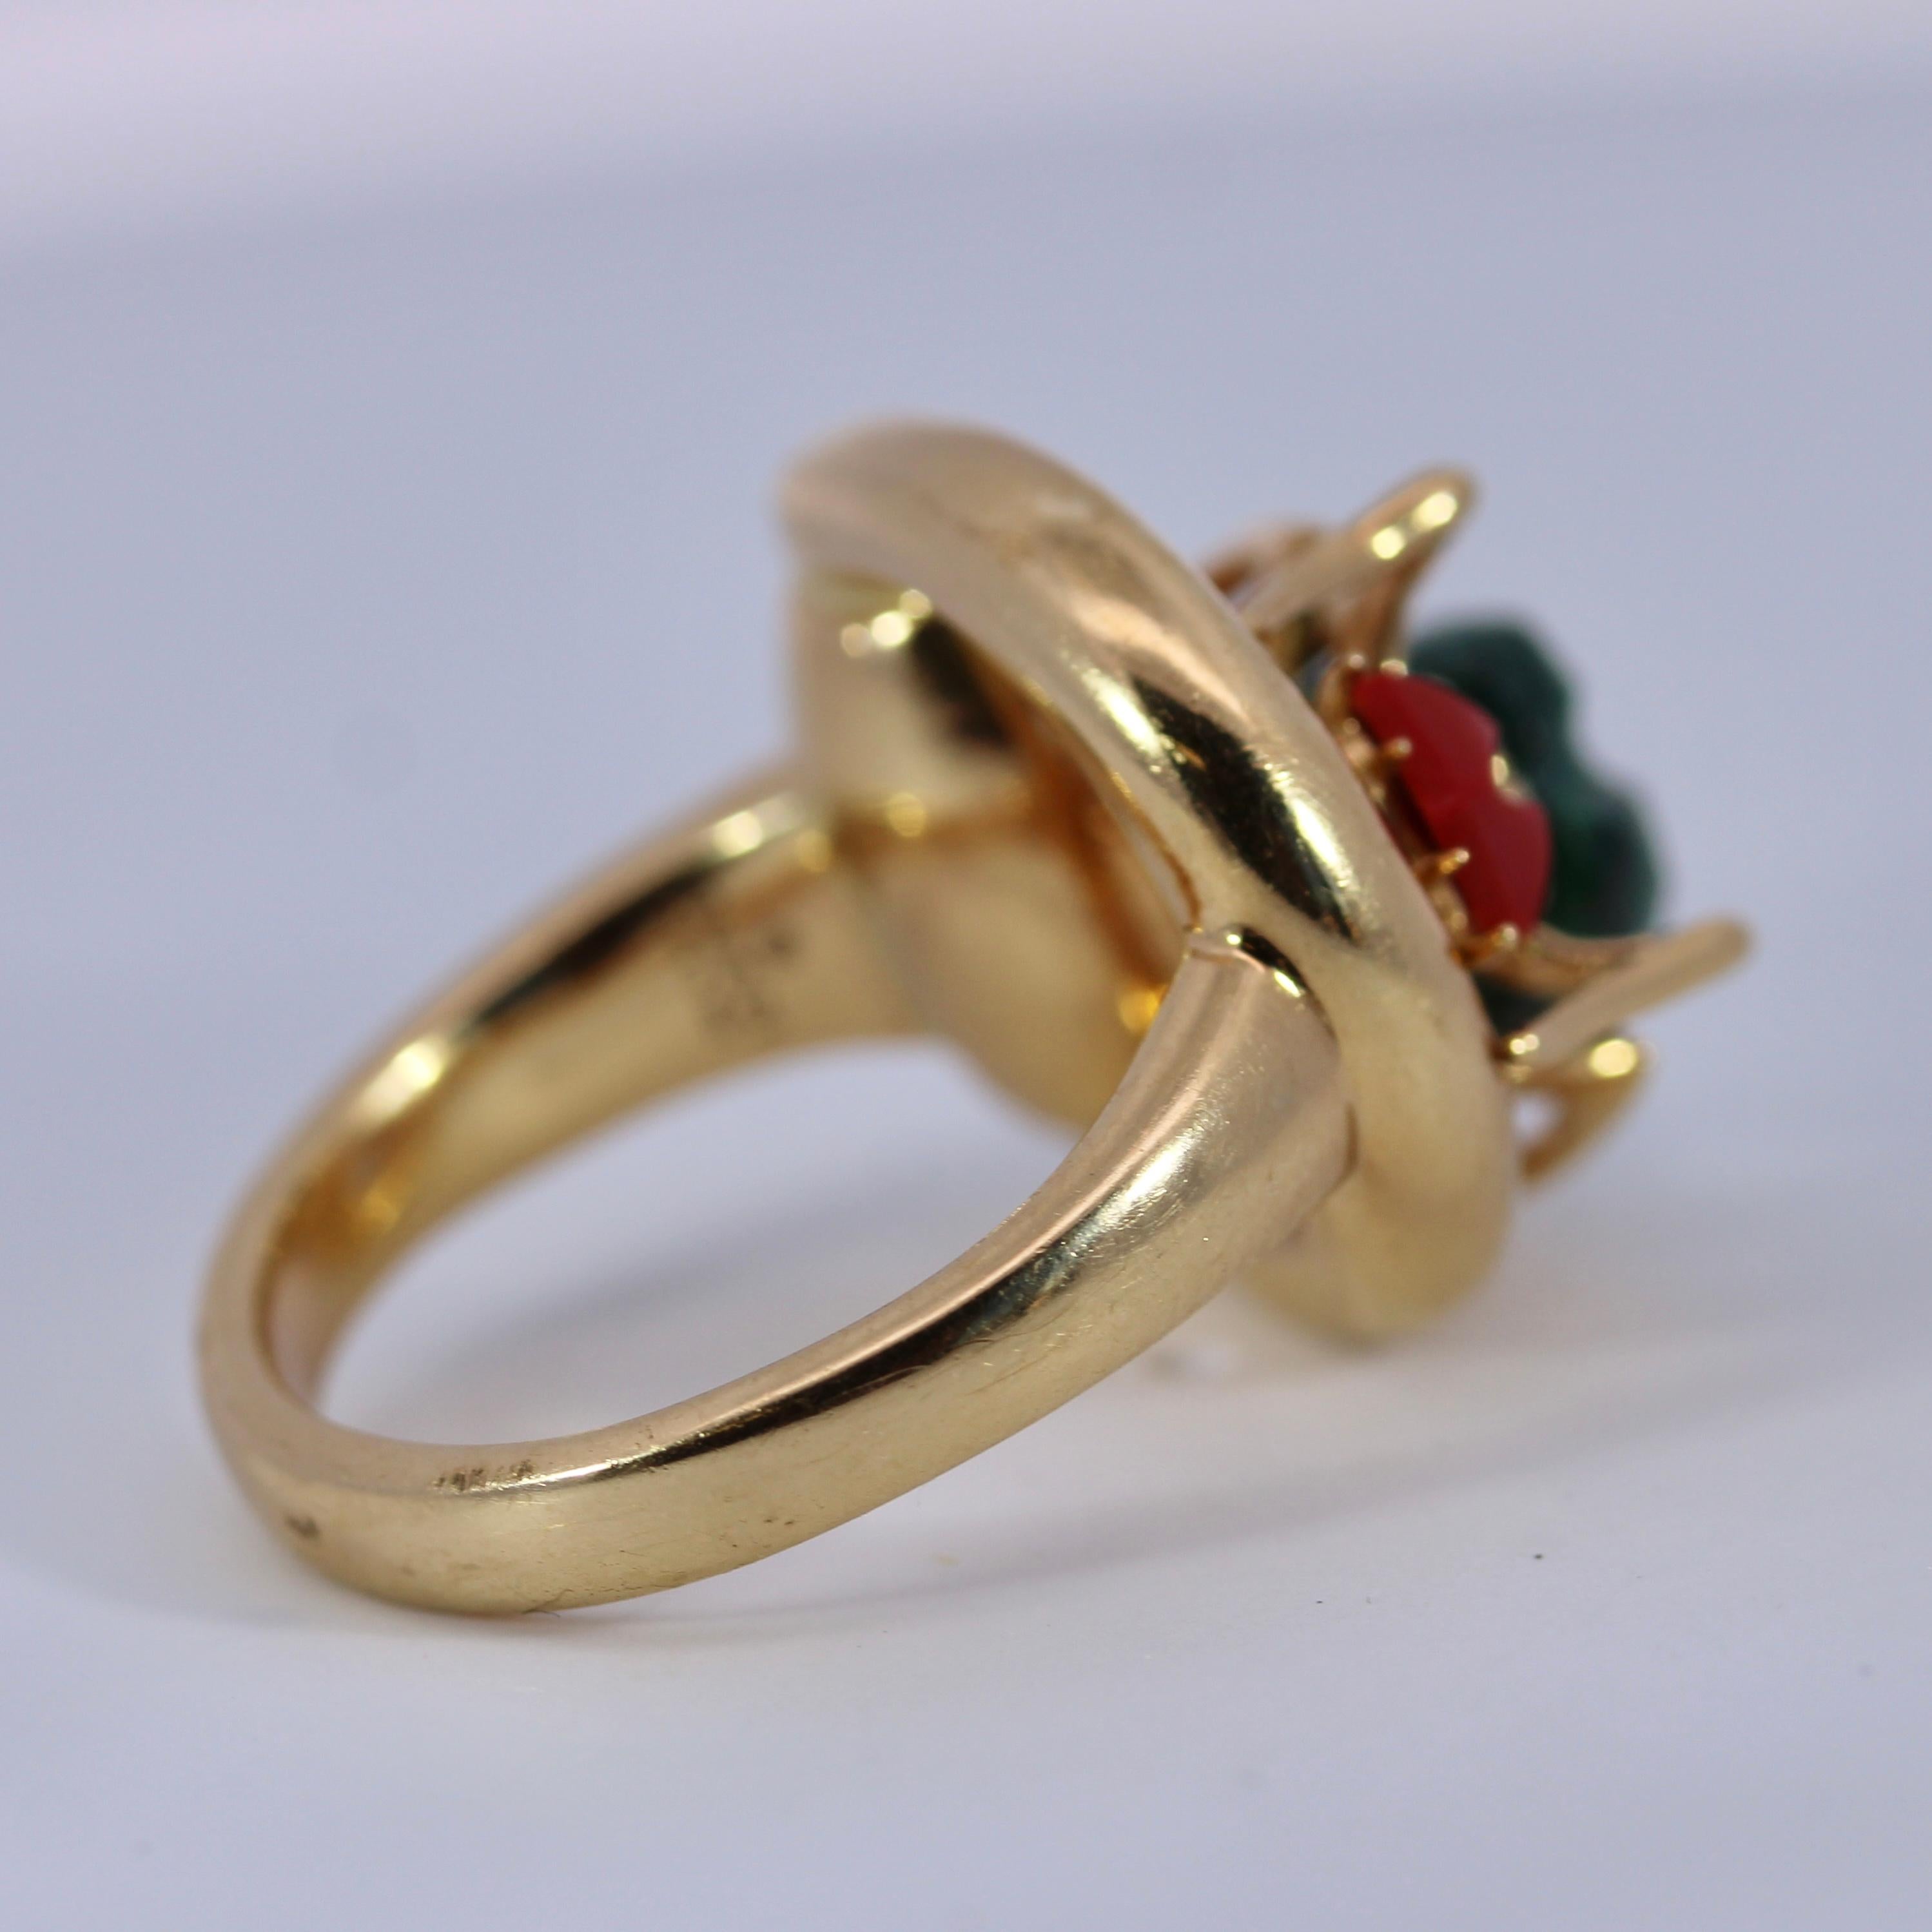 Women's Gucci Milano 18K Yellow Gold Beetle Ring With Diamonds, Coral And Malachi For Sale